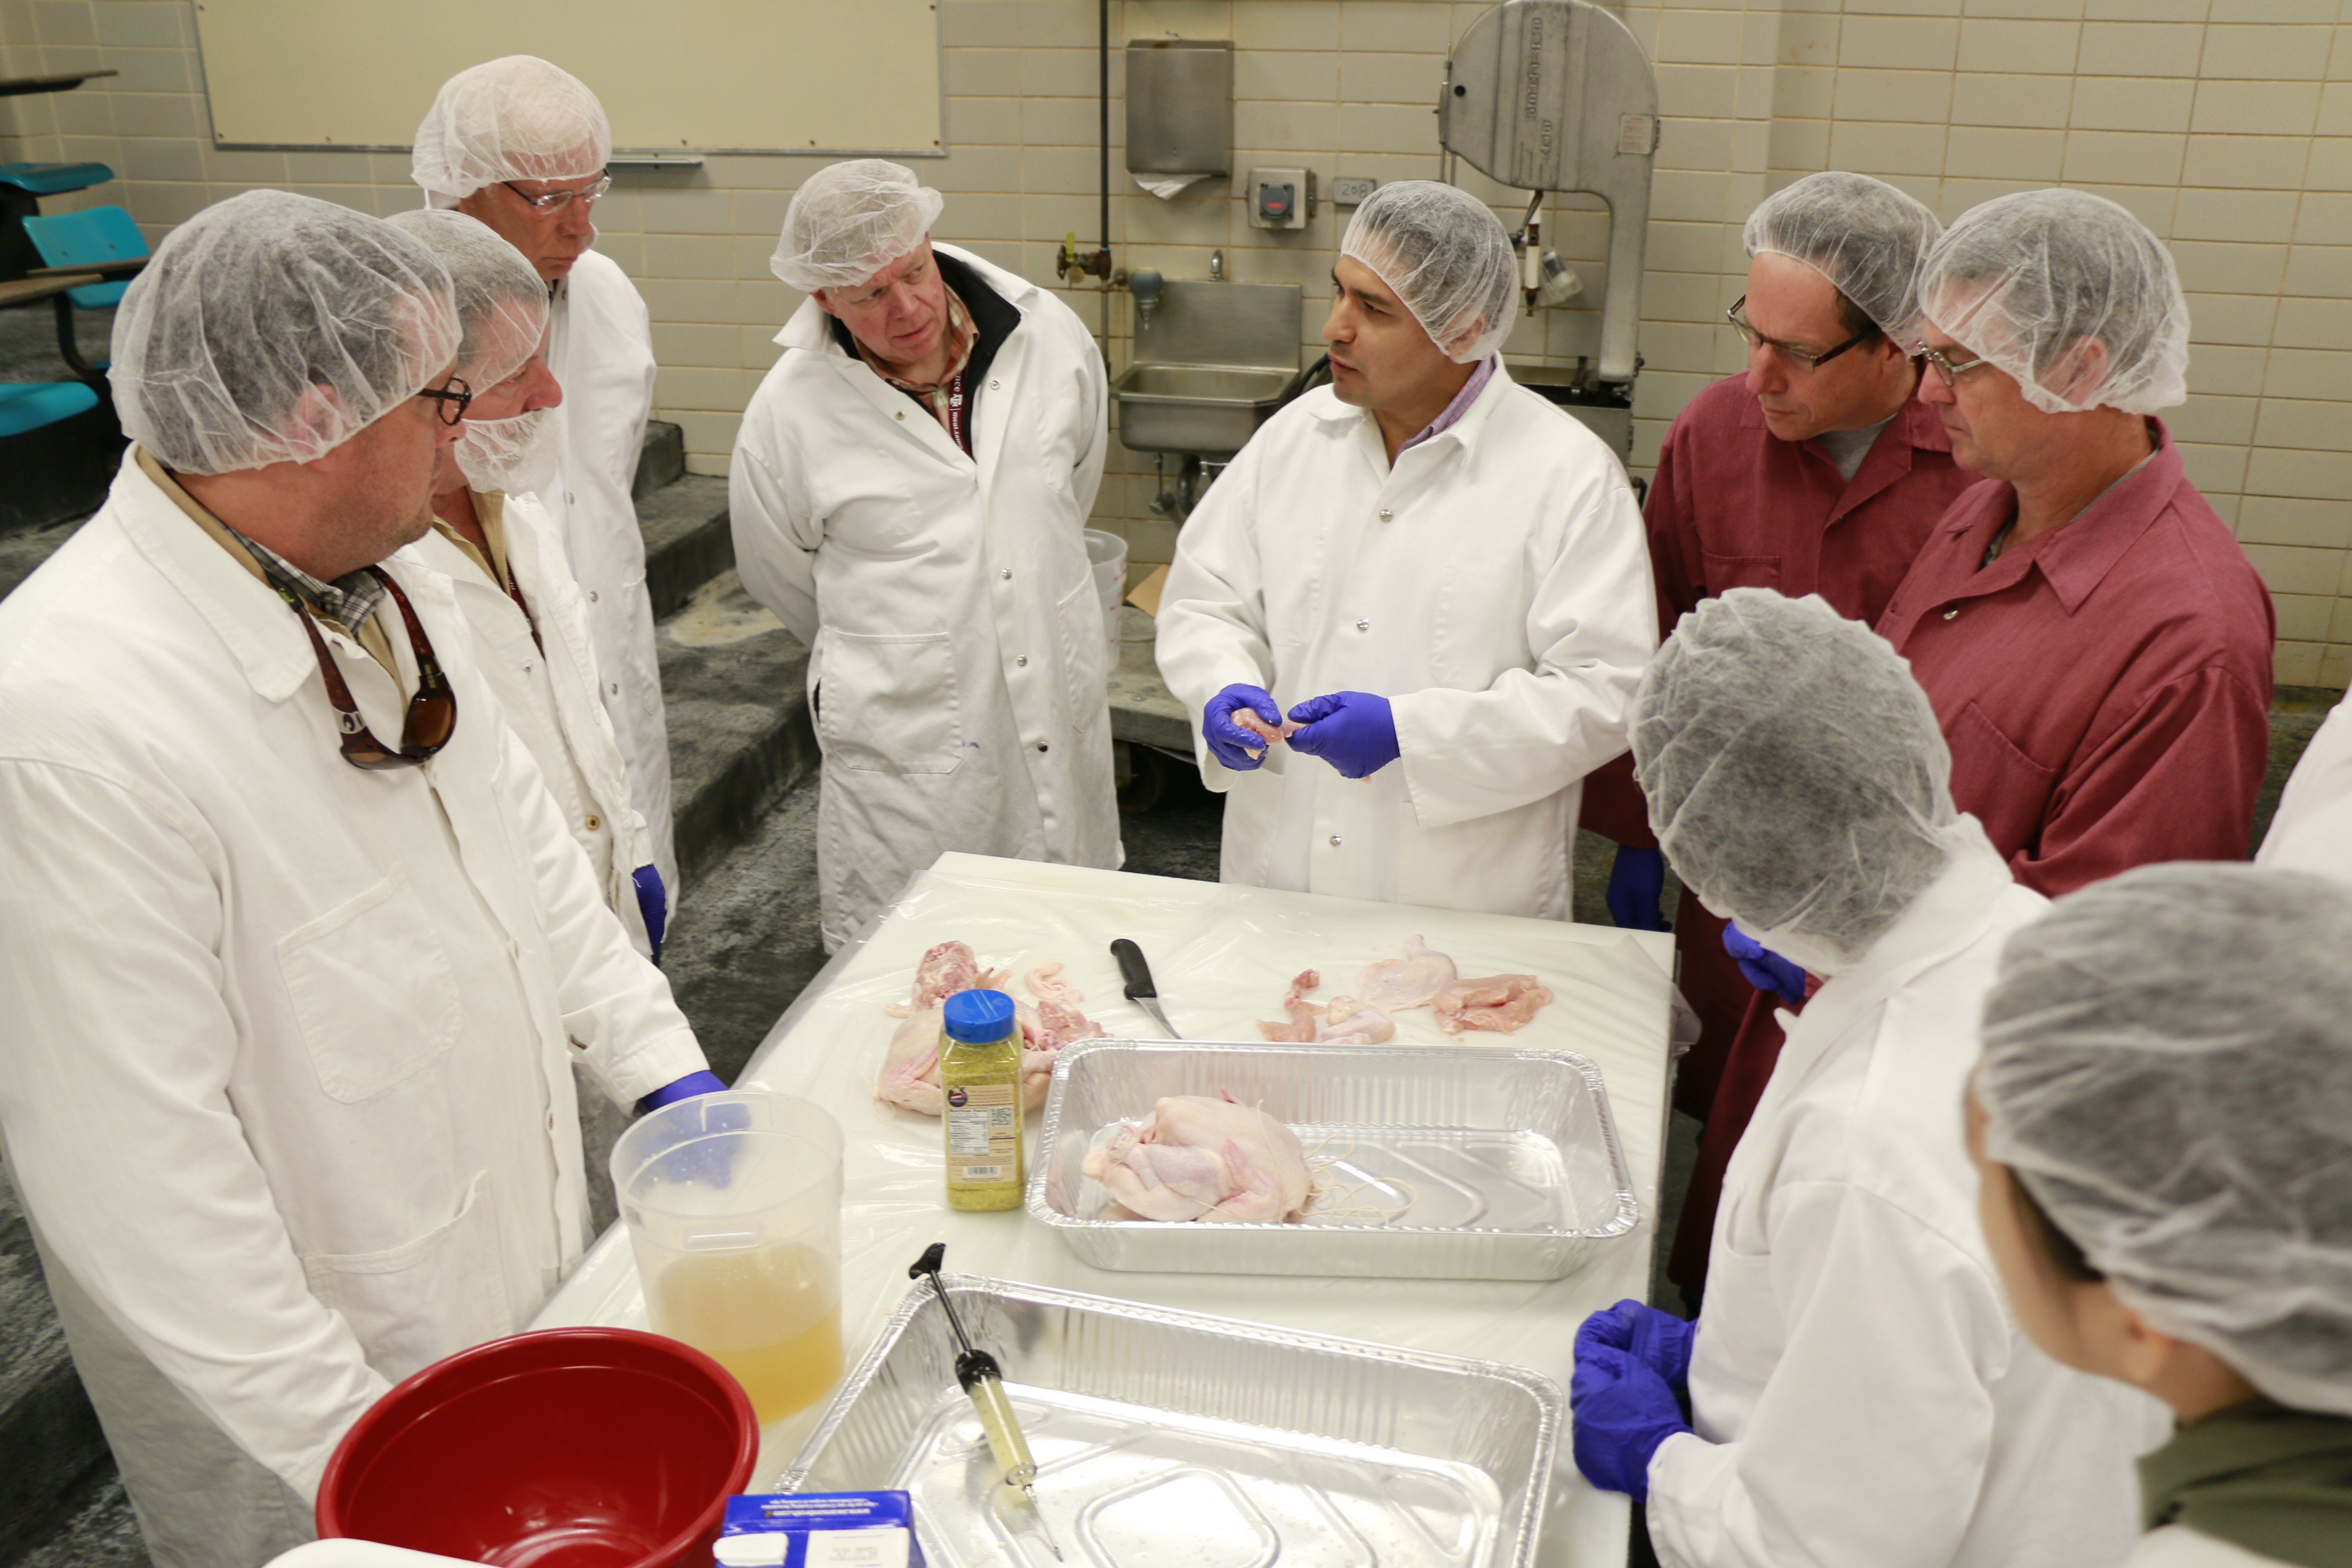 Poultry cutting demonstration